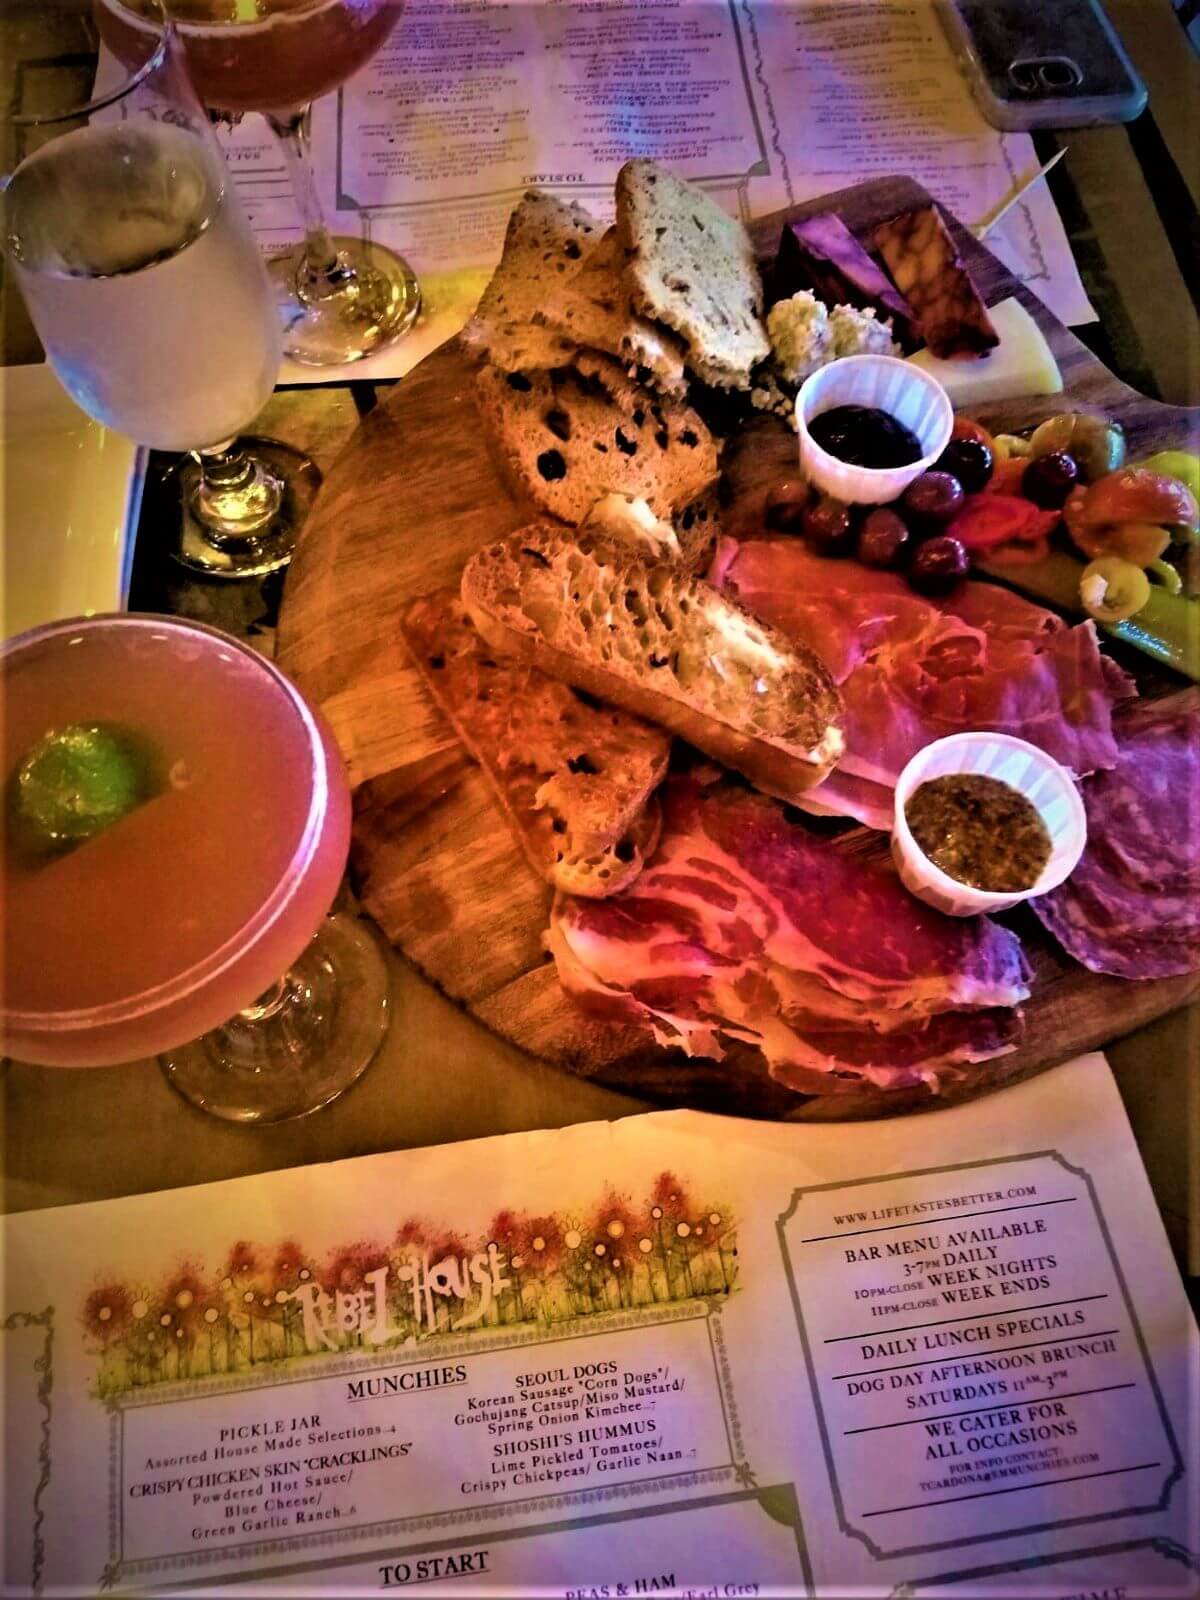 alt text = "a fancy cocktail with charcuterie board of meats, cheeses and accompaniments"